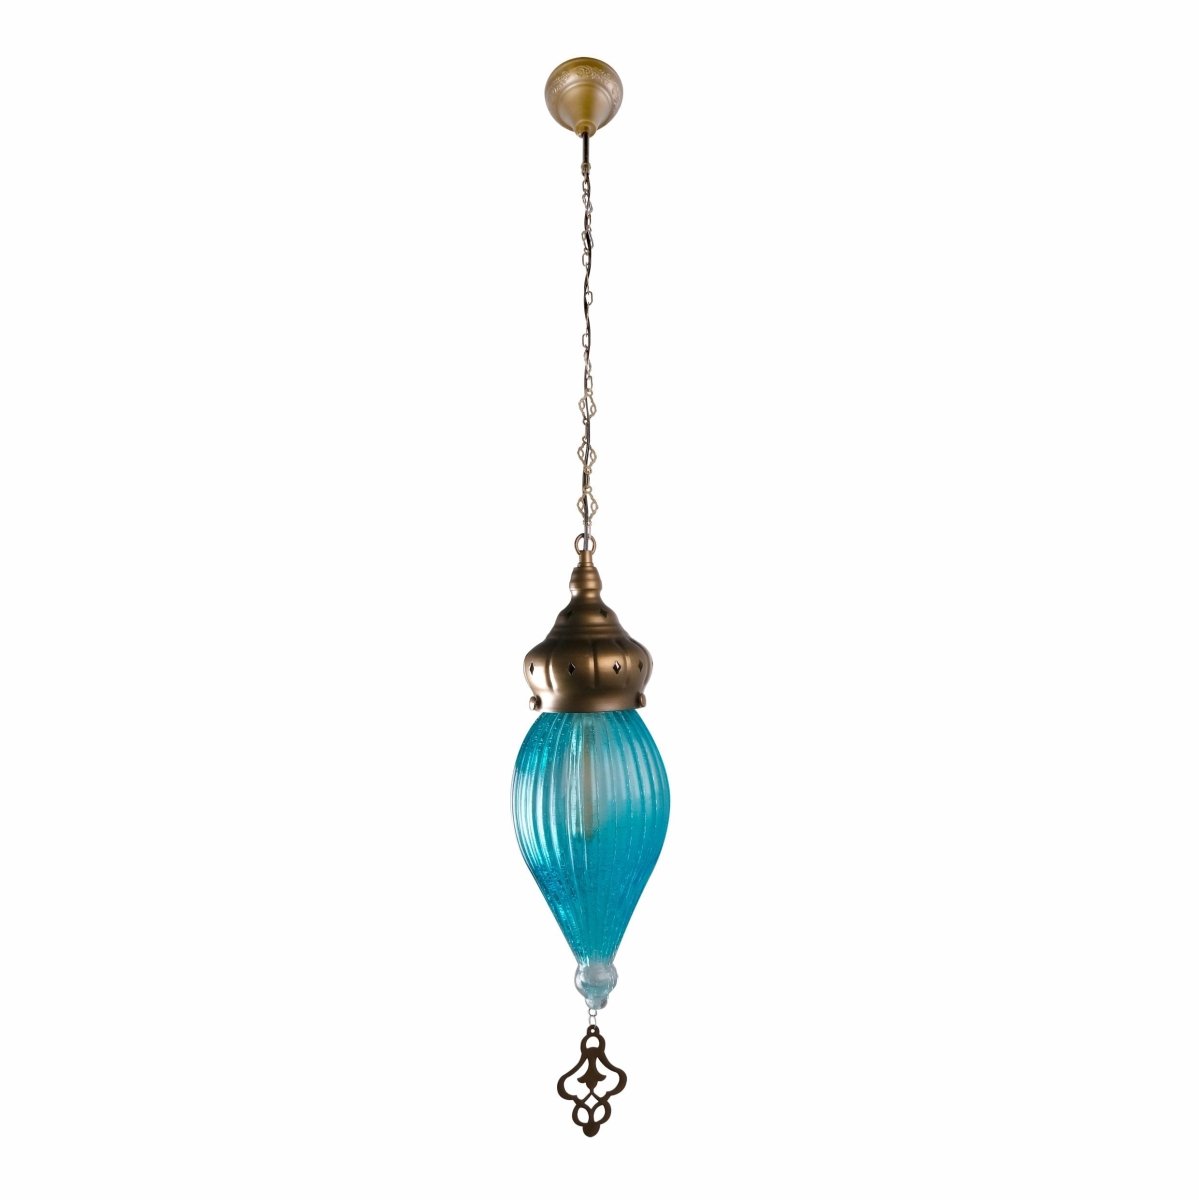 Main image of Moroccan Style Antique Brass and Blue Glass Pendant Light E27 | TEKLED 158-195581